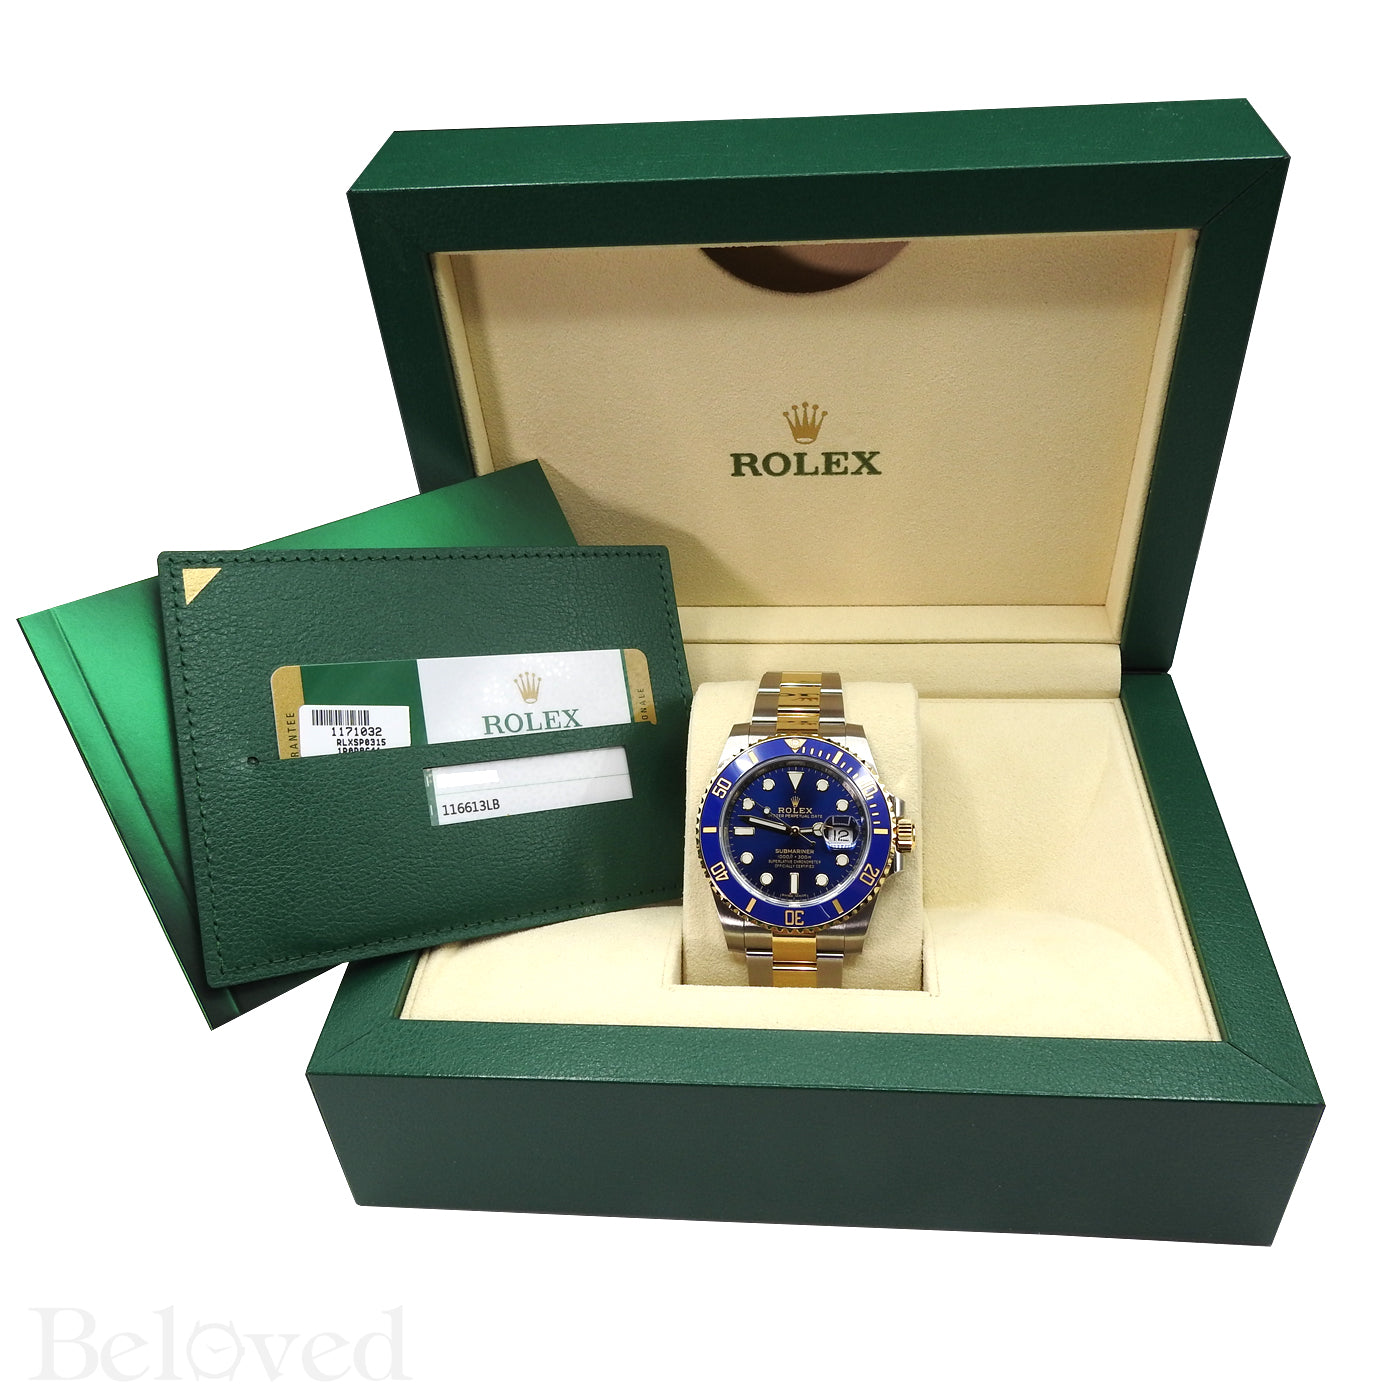 Rolex Submariner 116613 Ceramic Submariner Complete with Rolex Box and Rolex Five Year Warranty Card Image 4